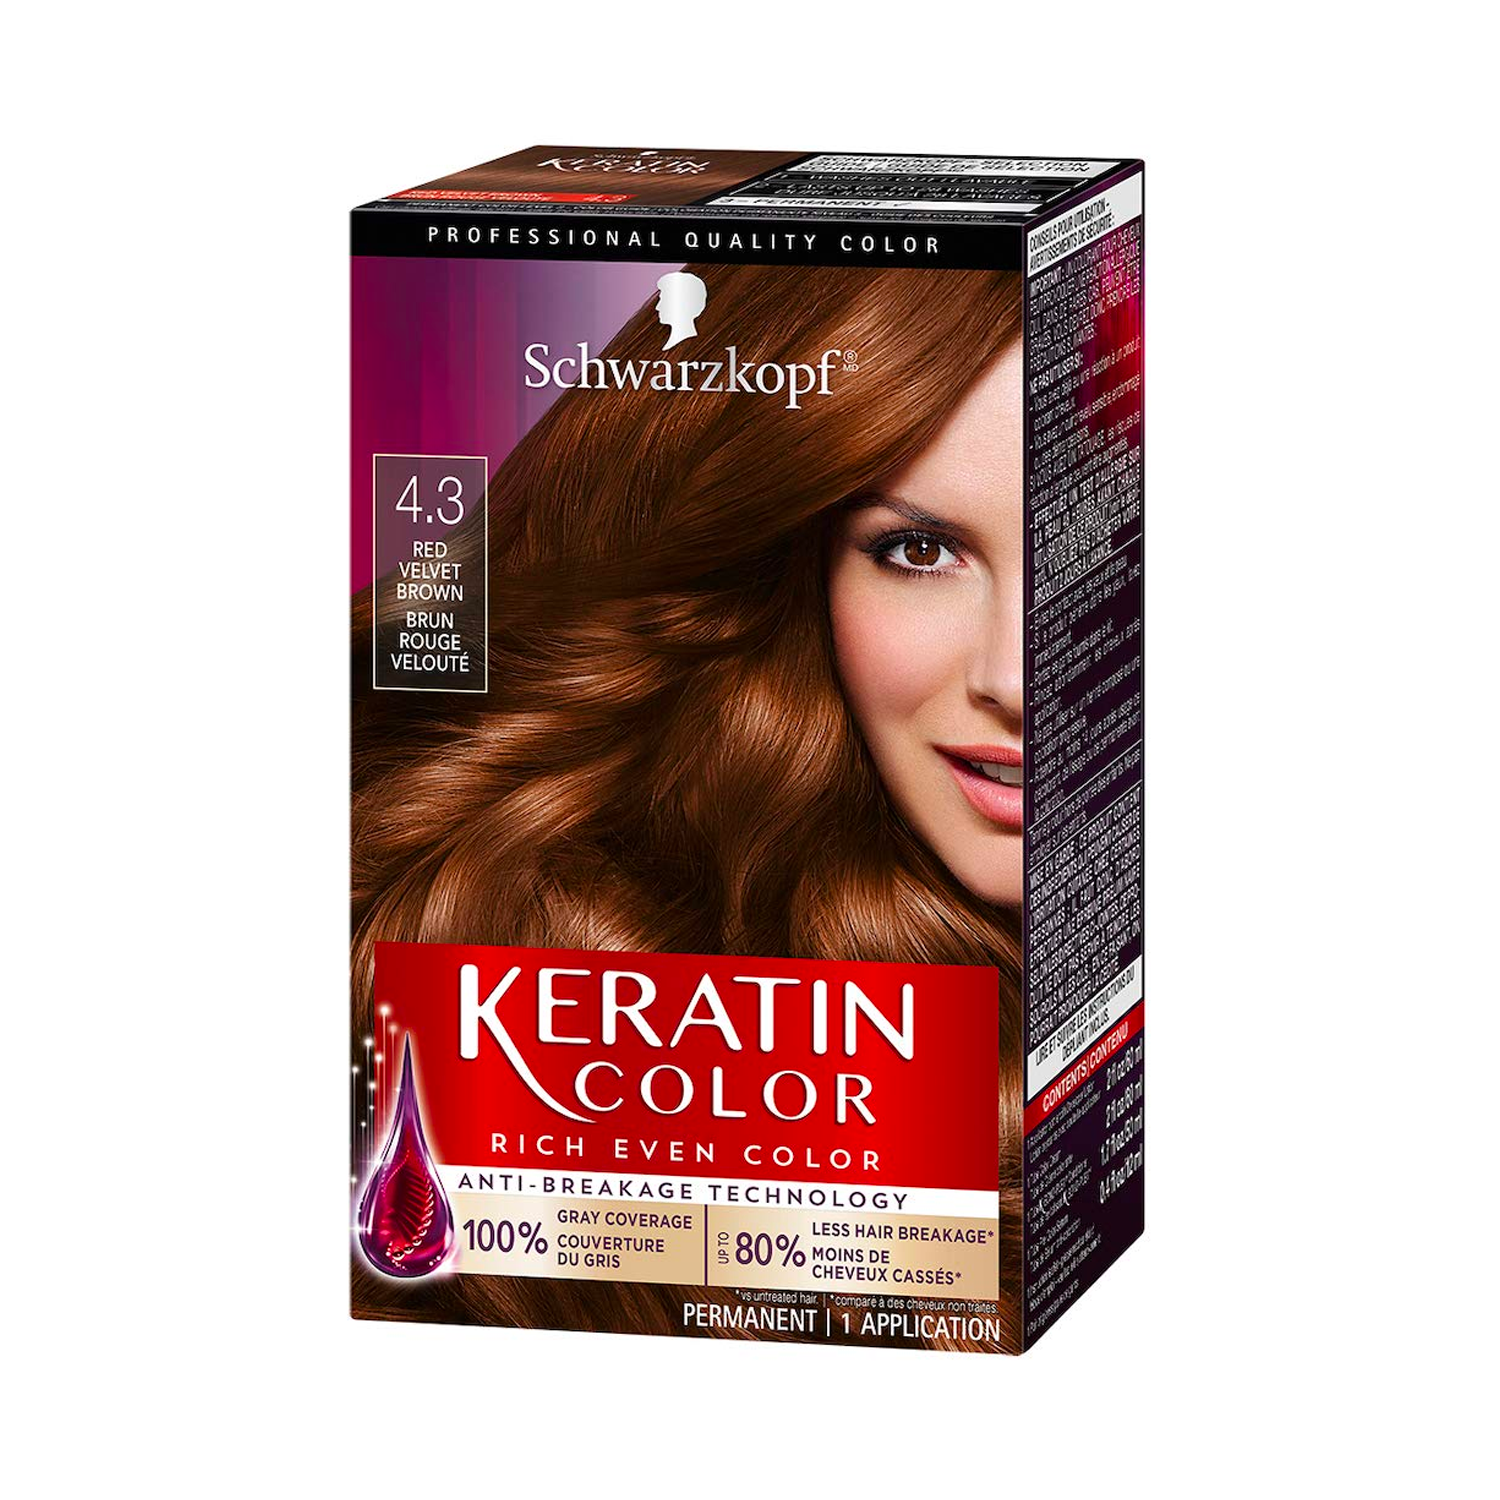 17 Best At-Home Hair Colors Brands and Kits, Reviewed for 2023